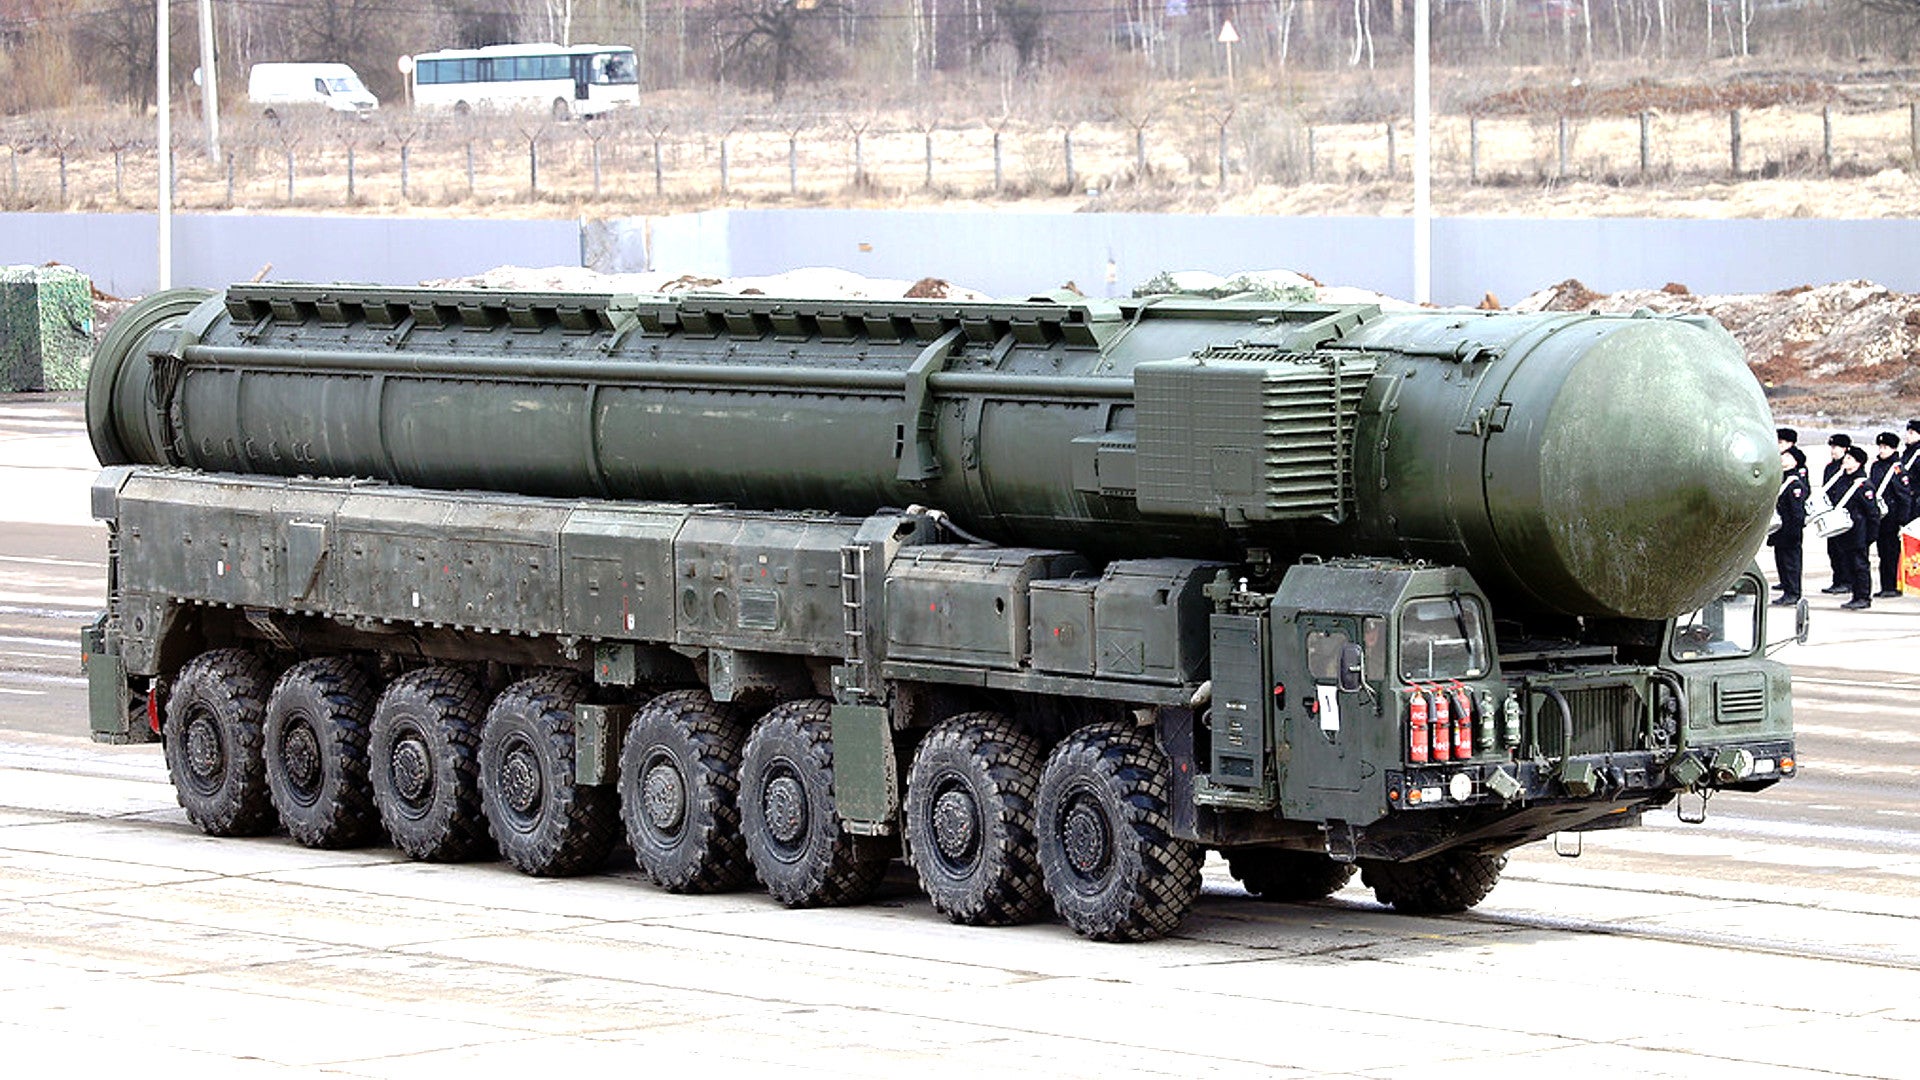 Russia Tests Modified RS-24 Ballistic Missile With an “Experimental Warhead”